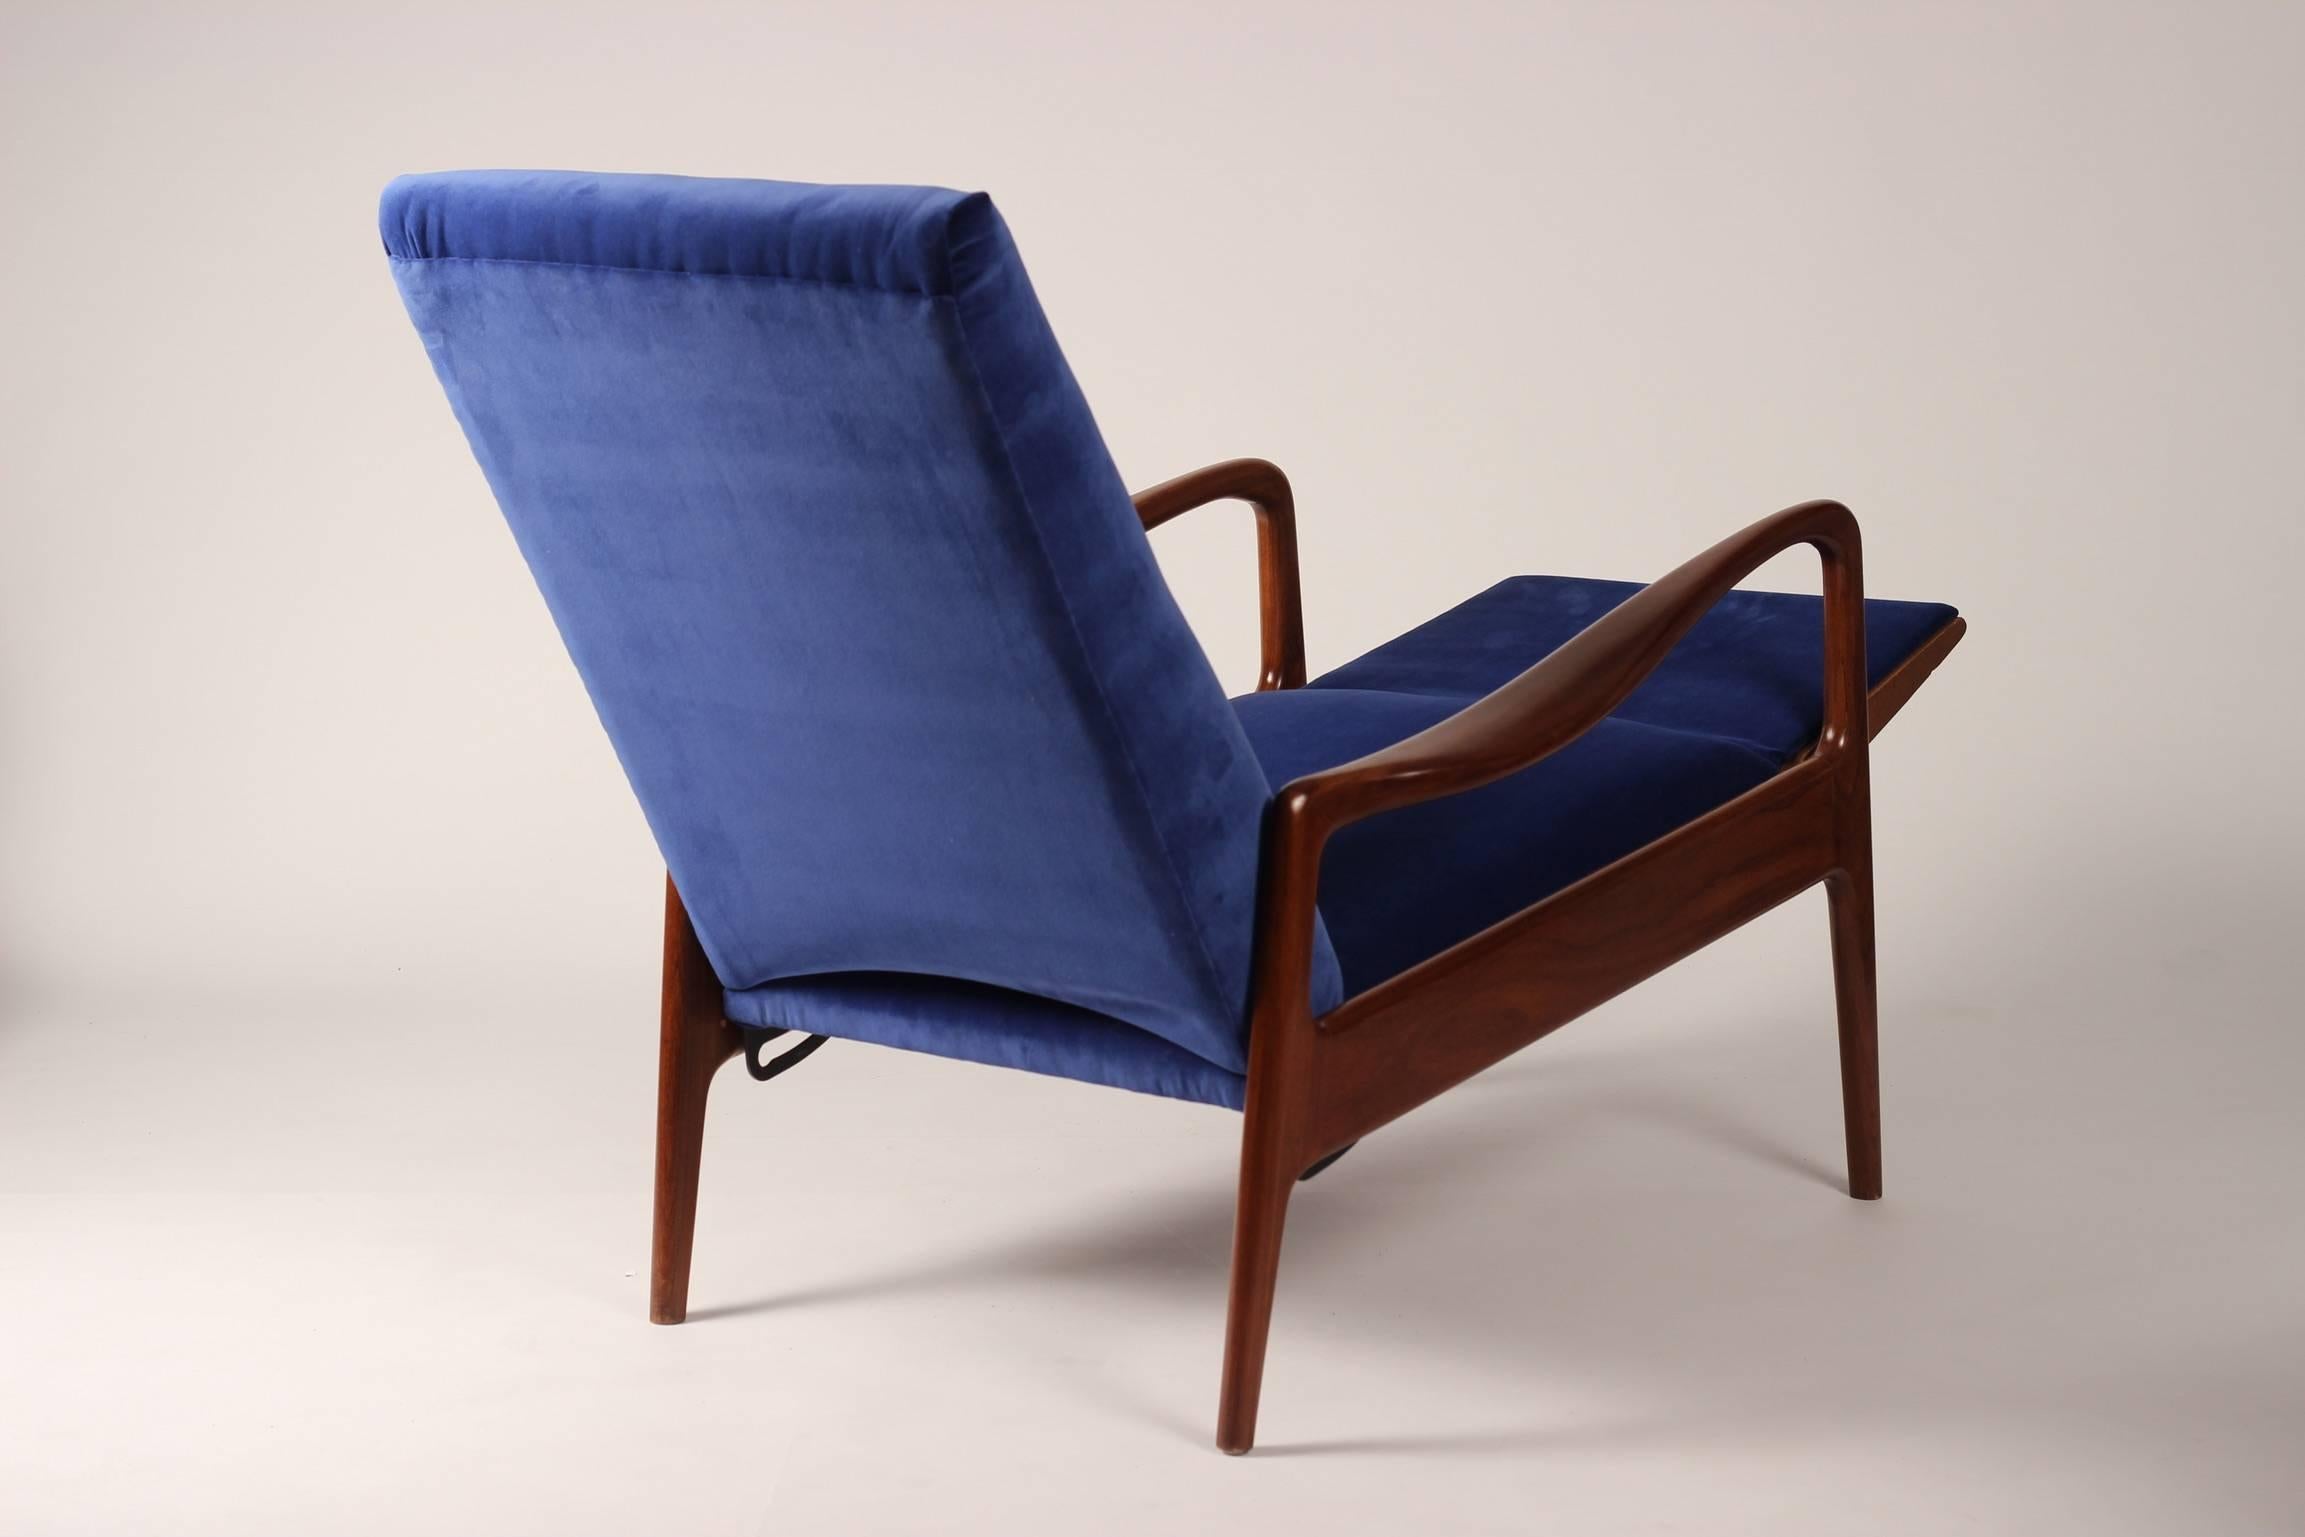 20th Century Mid-Century Modern Reclining Lounge Chair by Greaves and Thomas